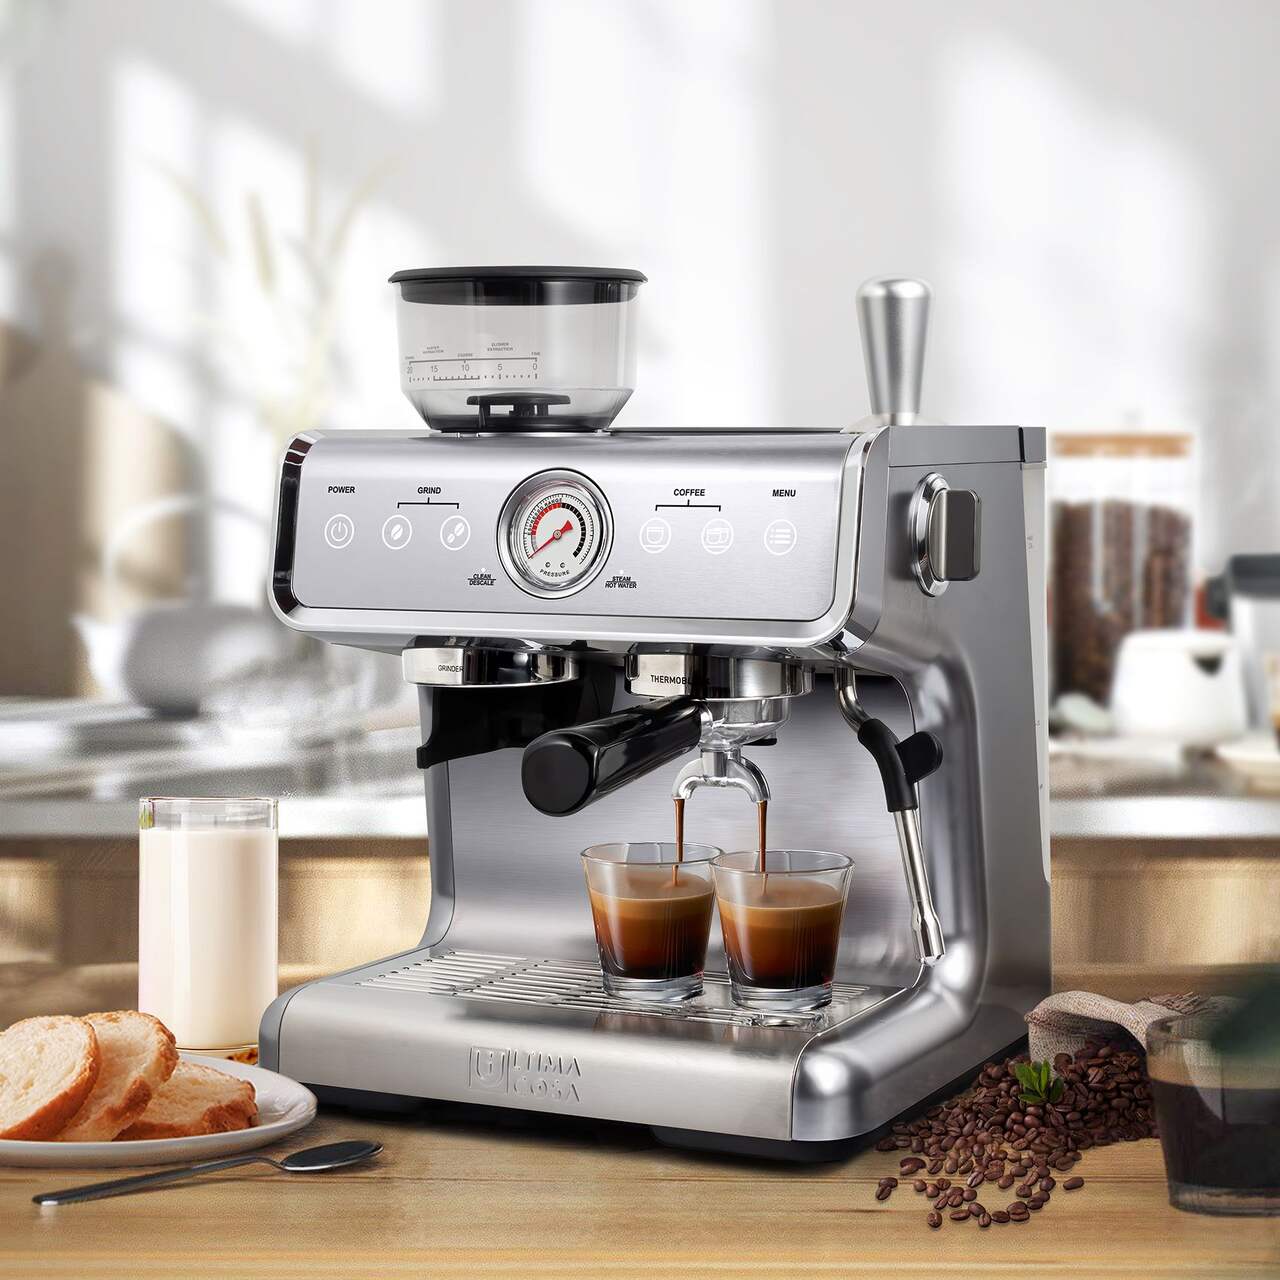 https://media-www.canadiantire.ca/product/living/kitchen/kitchen-appliances/4990037/ultima-cosa-espresso-maker-9c3824be-e290-4aa4-9342-a1f54f4040ce-jpgrendition.jpg?imdensity=1&imwidth=1244&impolicy=mZoom